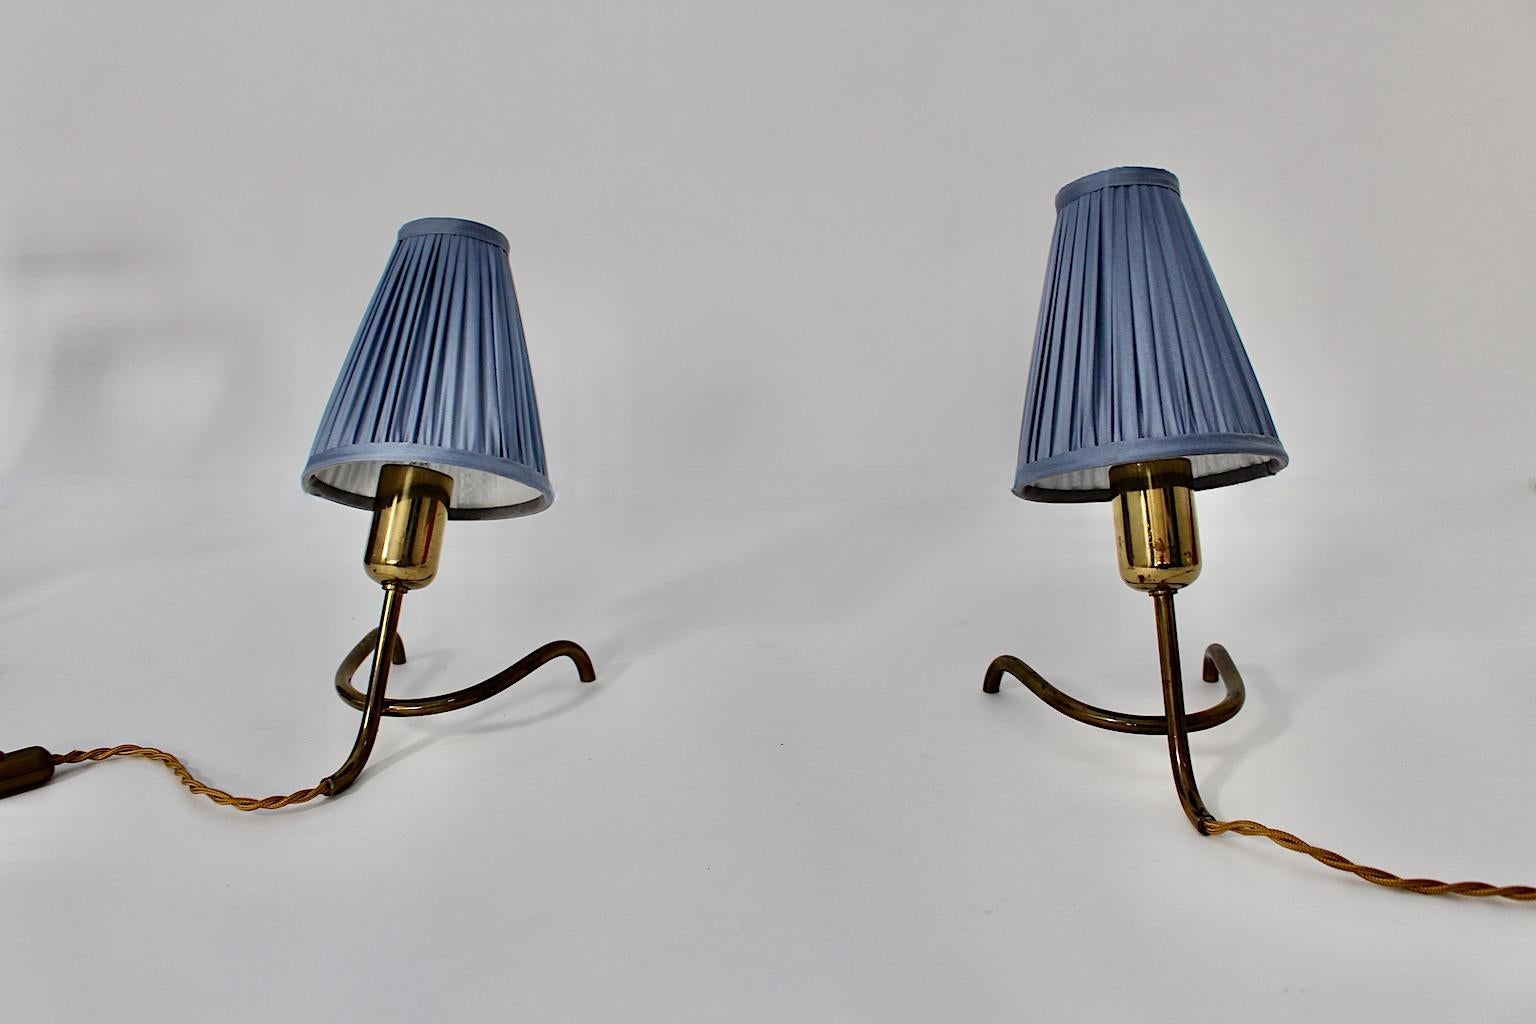 Mid Century Modern Vintage Brass Table Lamps Pair Duo with new pastel blue lamp shades from pleated silk, 1950s Austria.
A stunning pair table lamps from brass with clawfoot base and 
new handmade lamp shades from pleated silk in pastel blue color